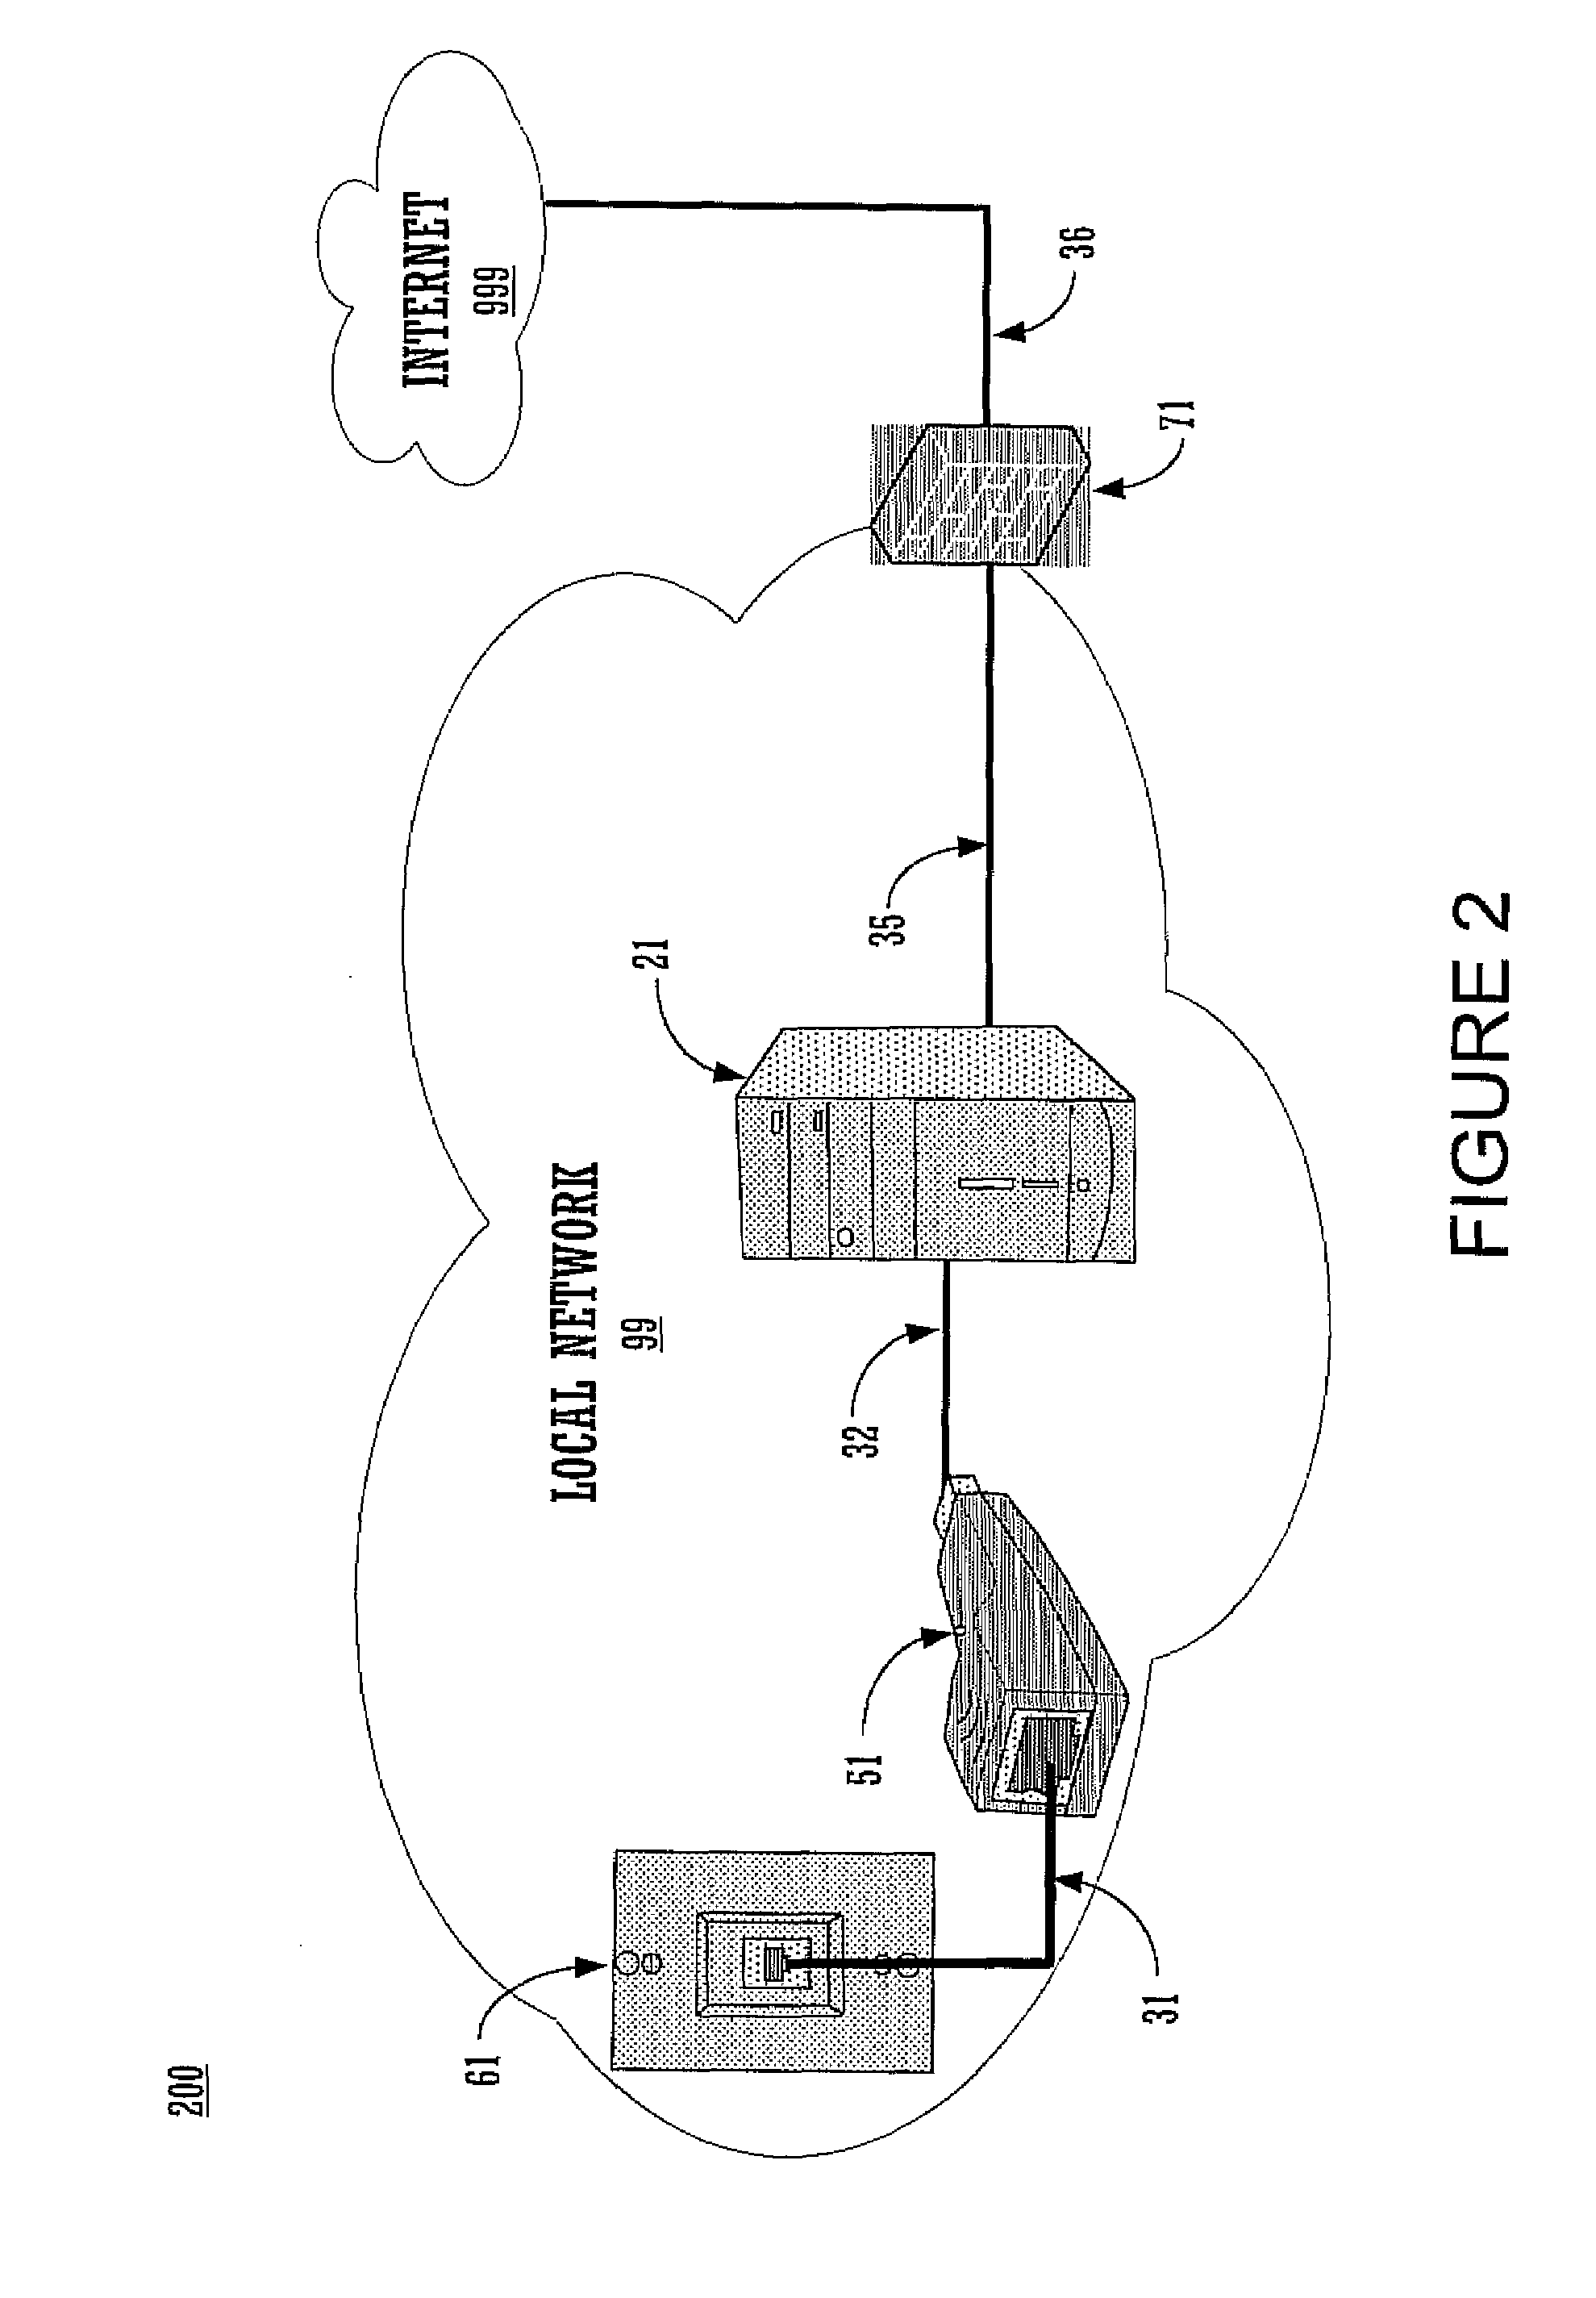 Automatically connecting remote network equipment through a graphical user interface